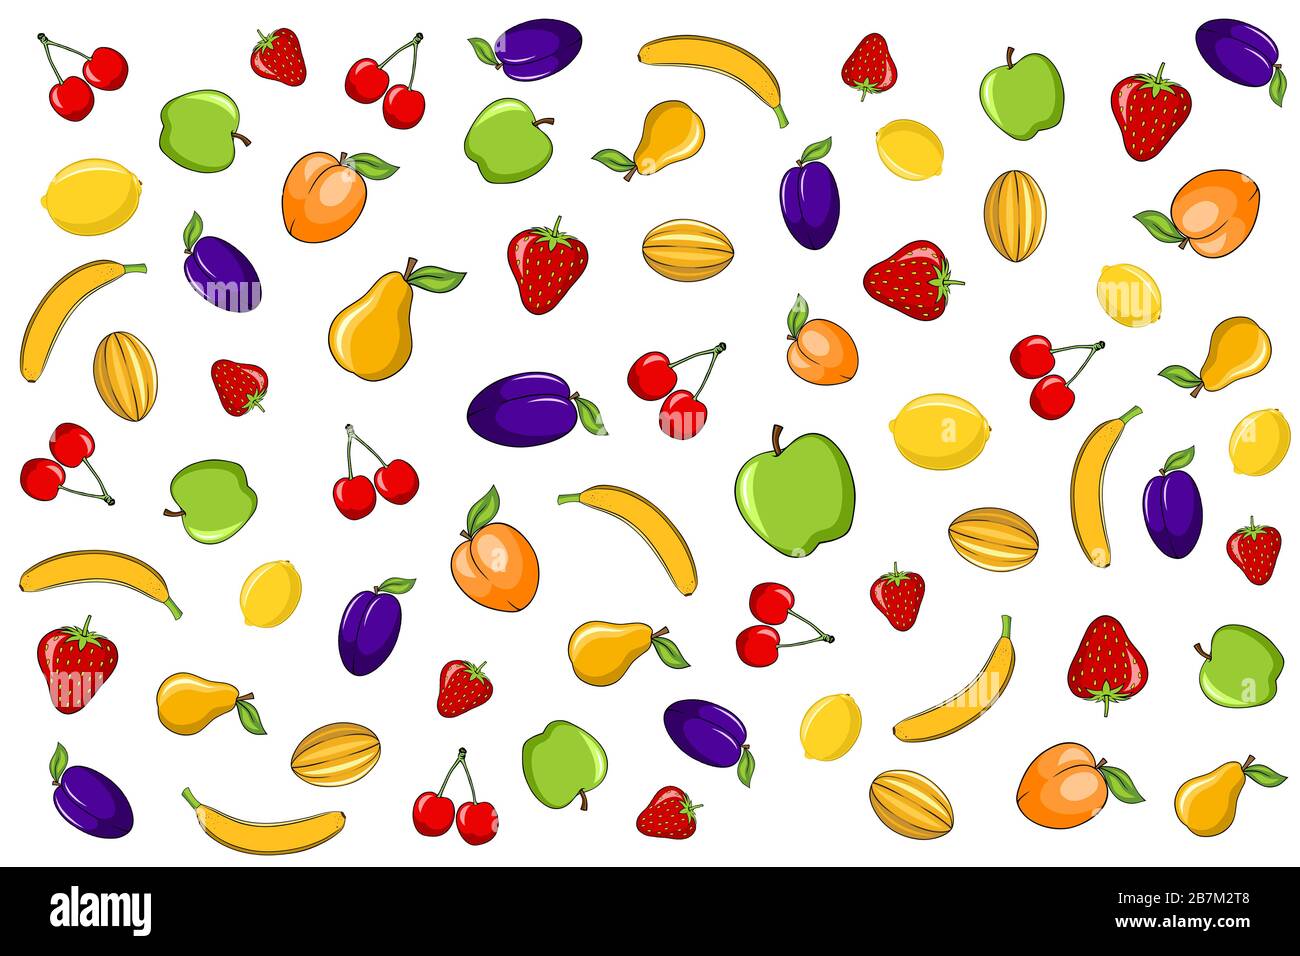 Cartoon colorful fruits over white background Stock Photo